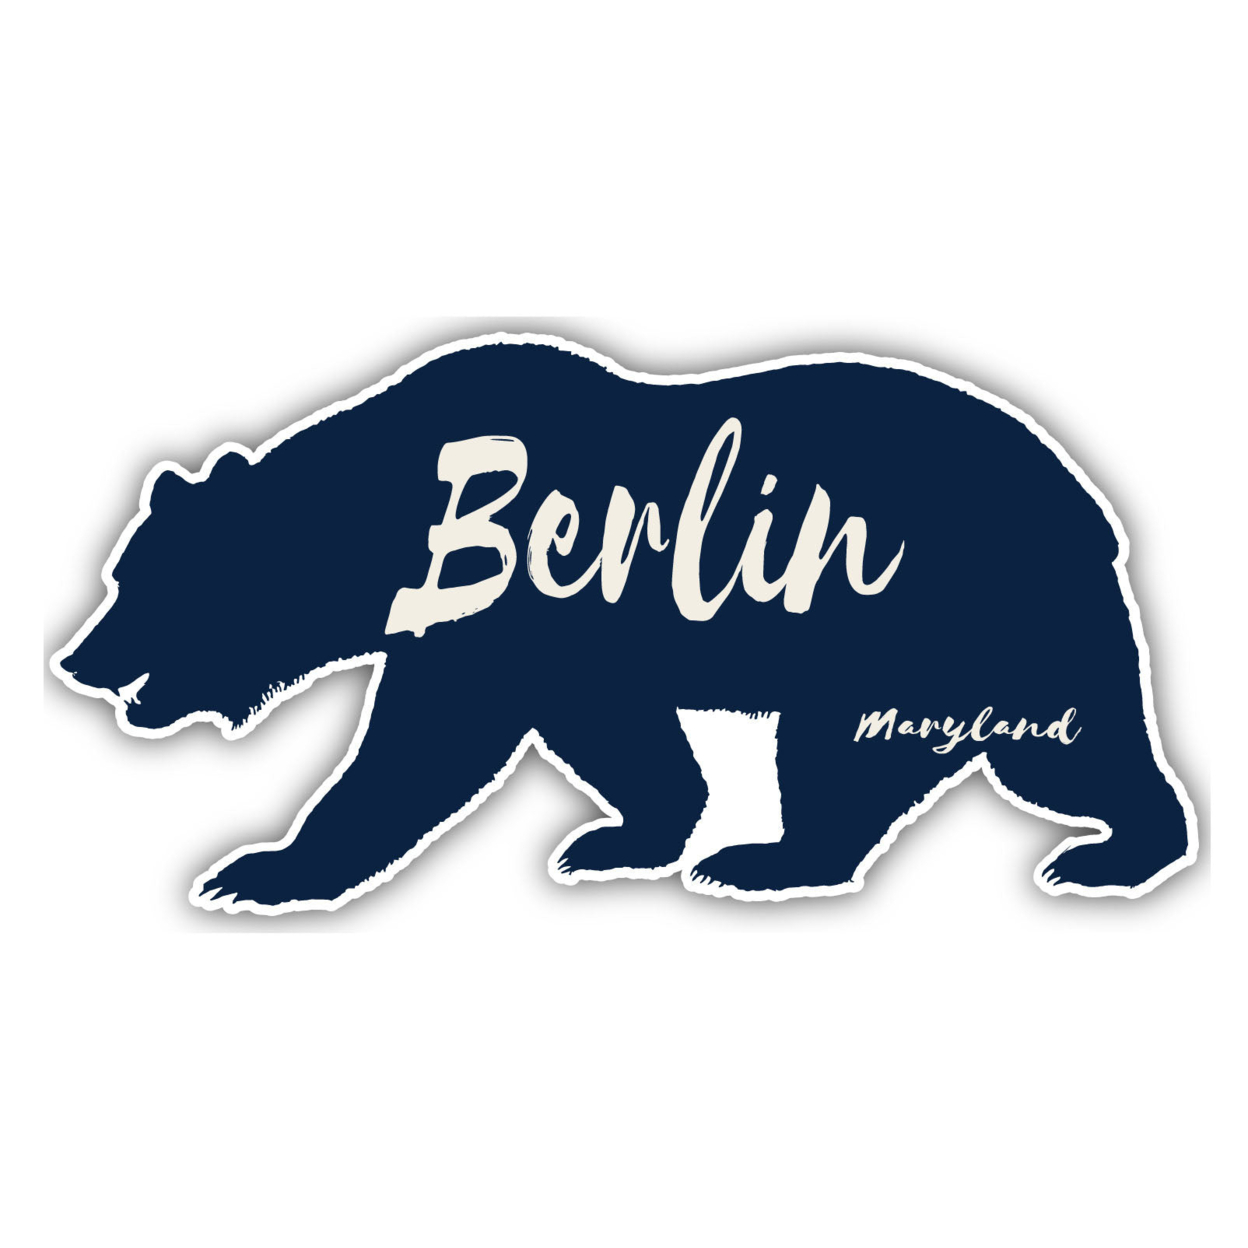 Berlin Maryland Souvenir Decorative Stickers (Choose Theme And Size) - 4-Pack, 10-Inch, Bear